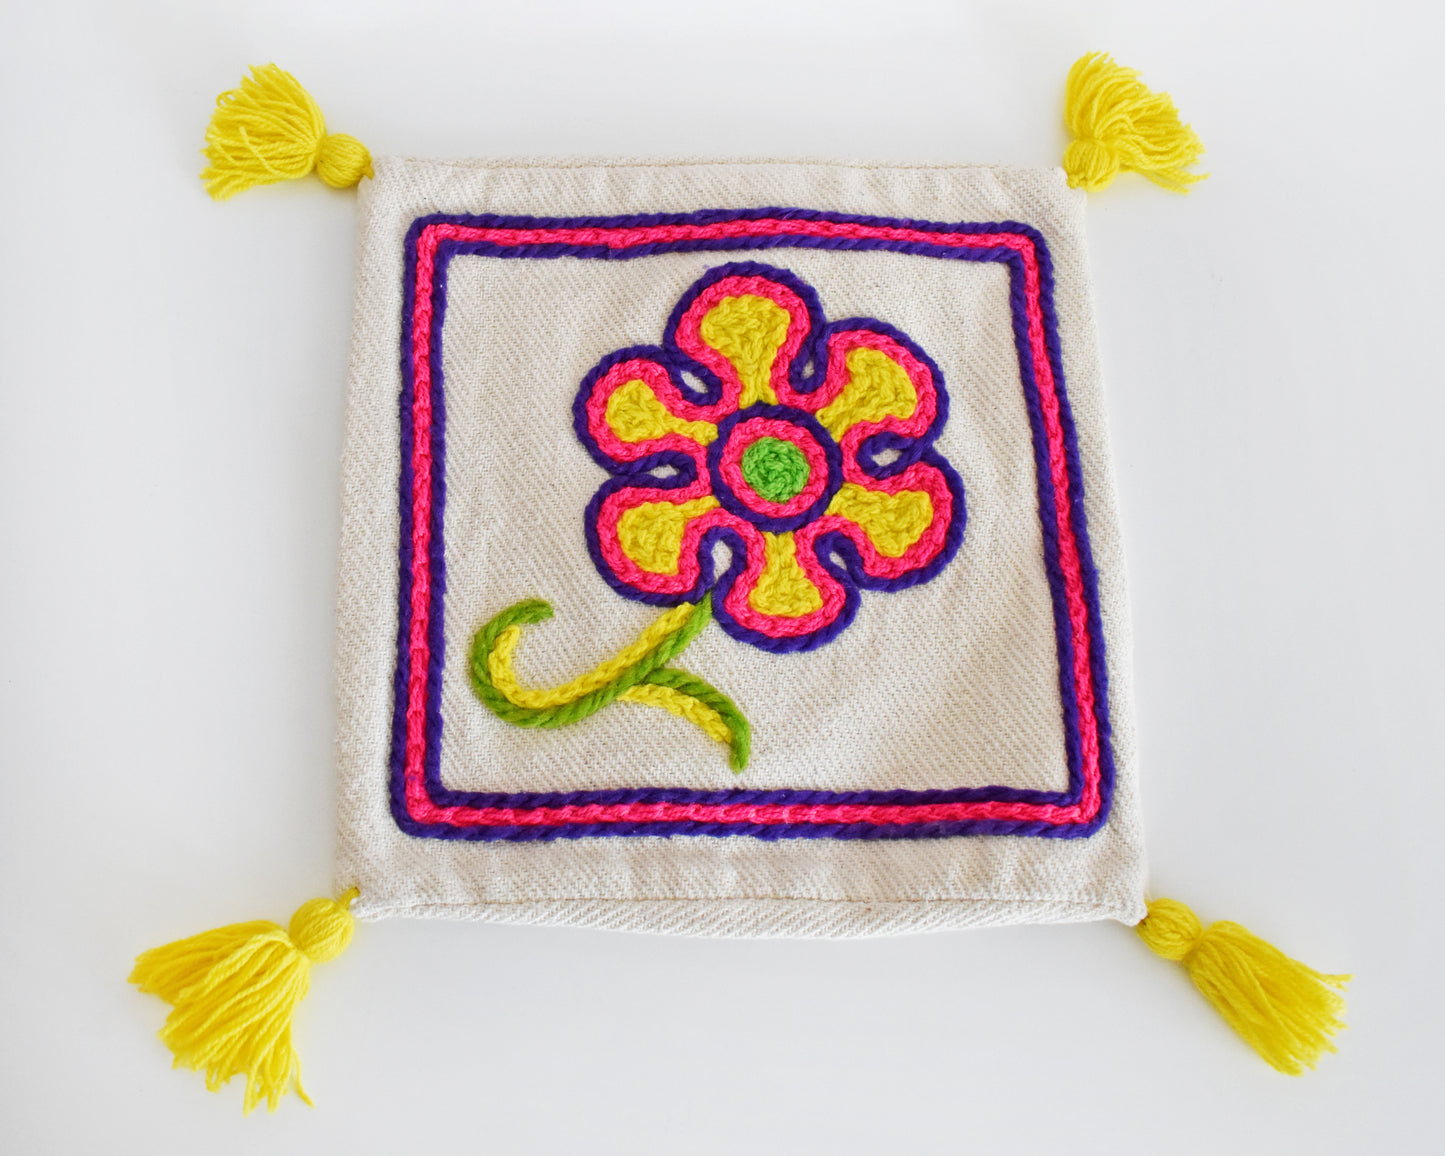 A vintage crewel embroidered floral pillow cover with yellow tassels on a table.